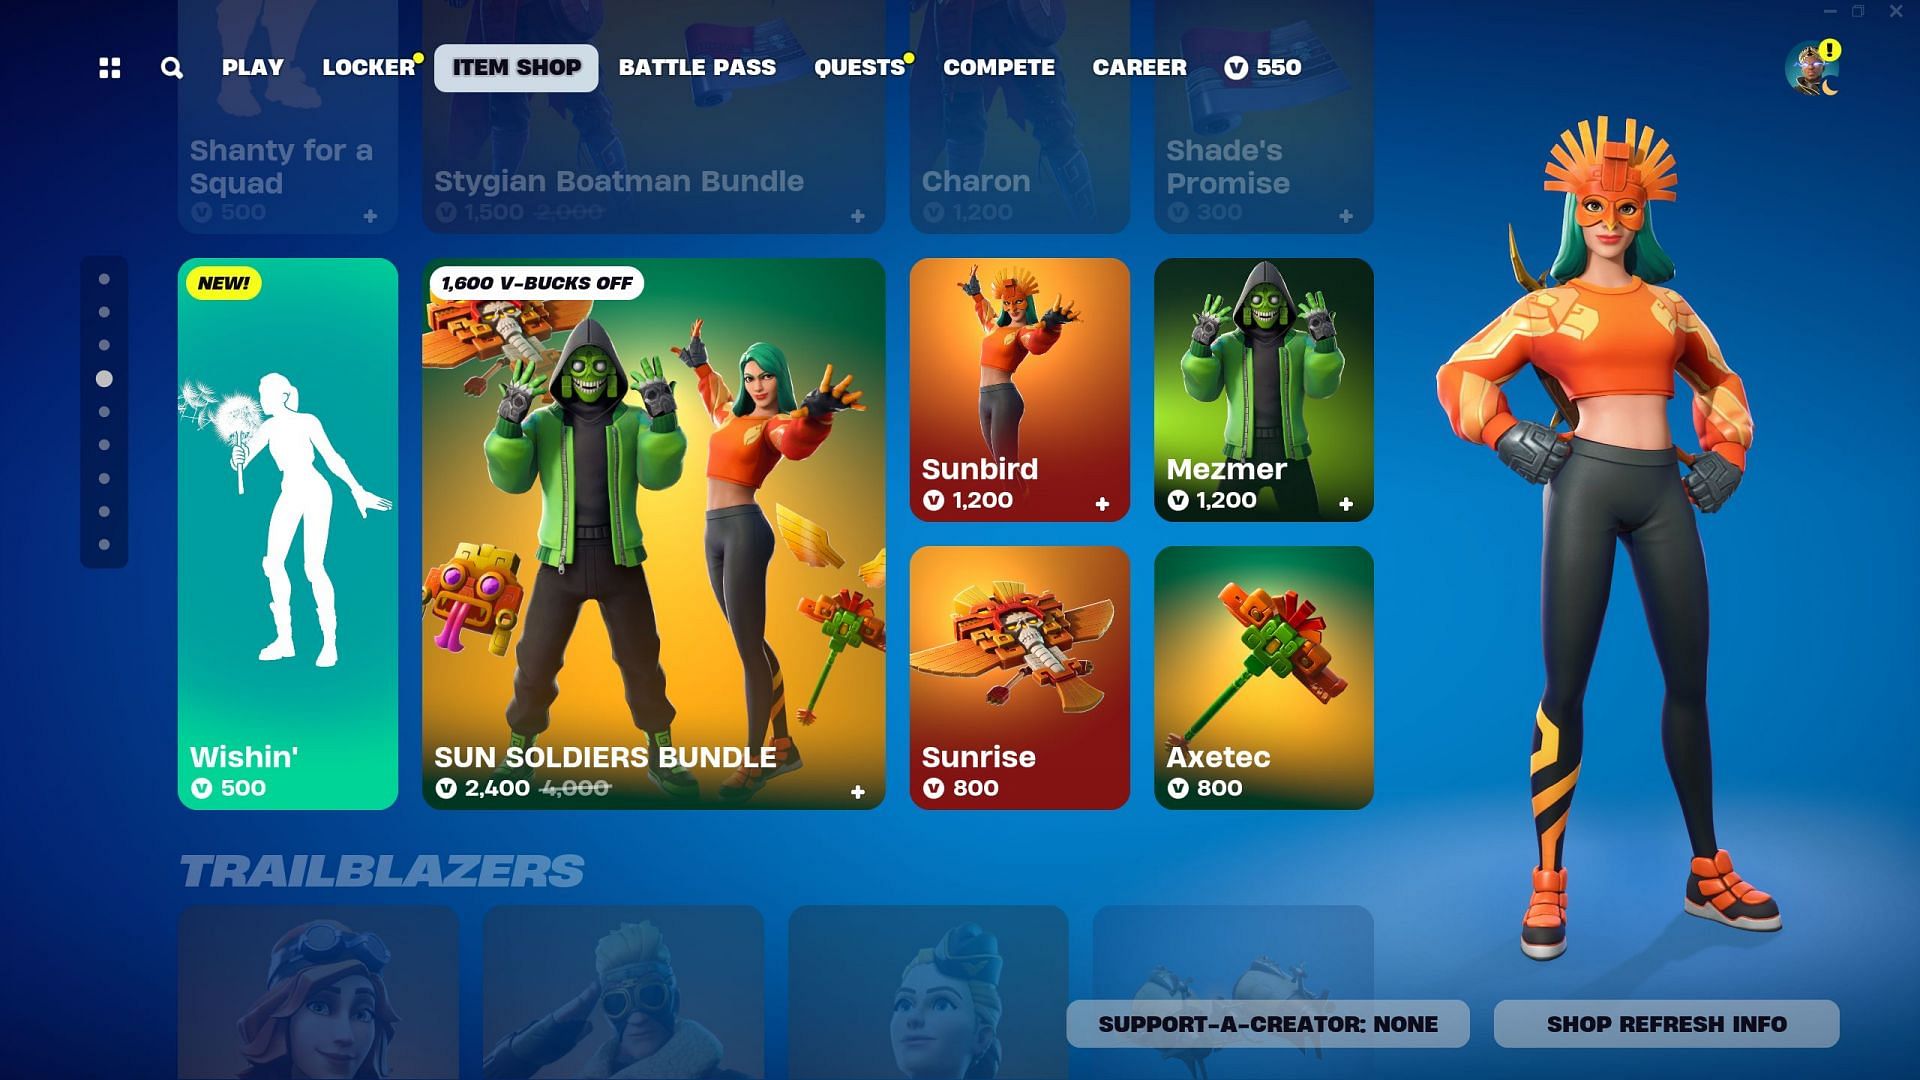 Sunbird and Mezmer skins are currently listed in the Item Shop (Image via Epic Games/Fortnite)